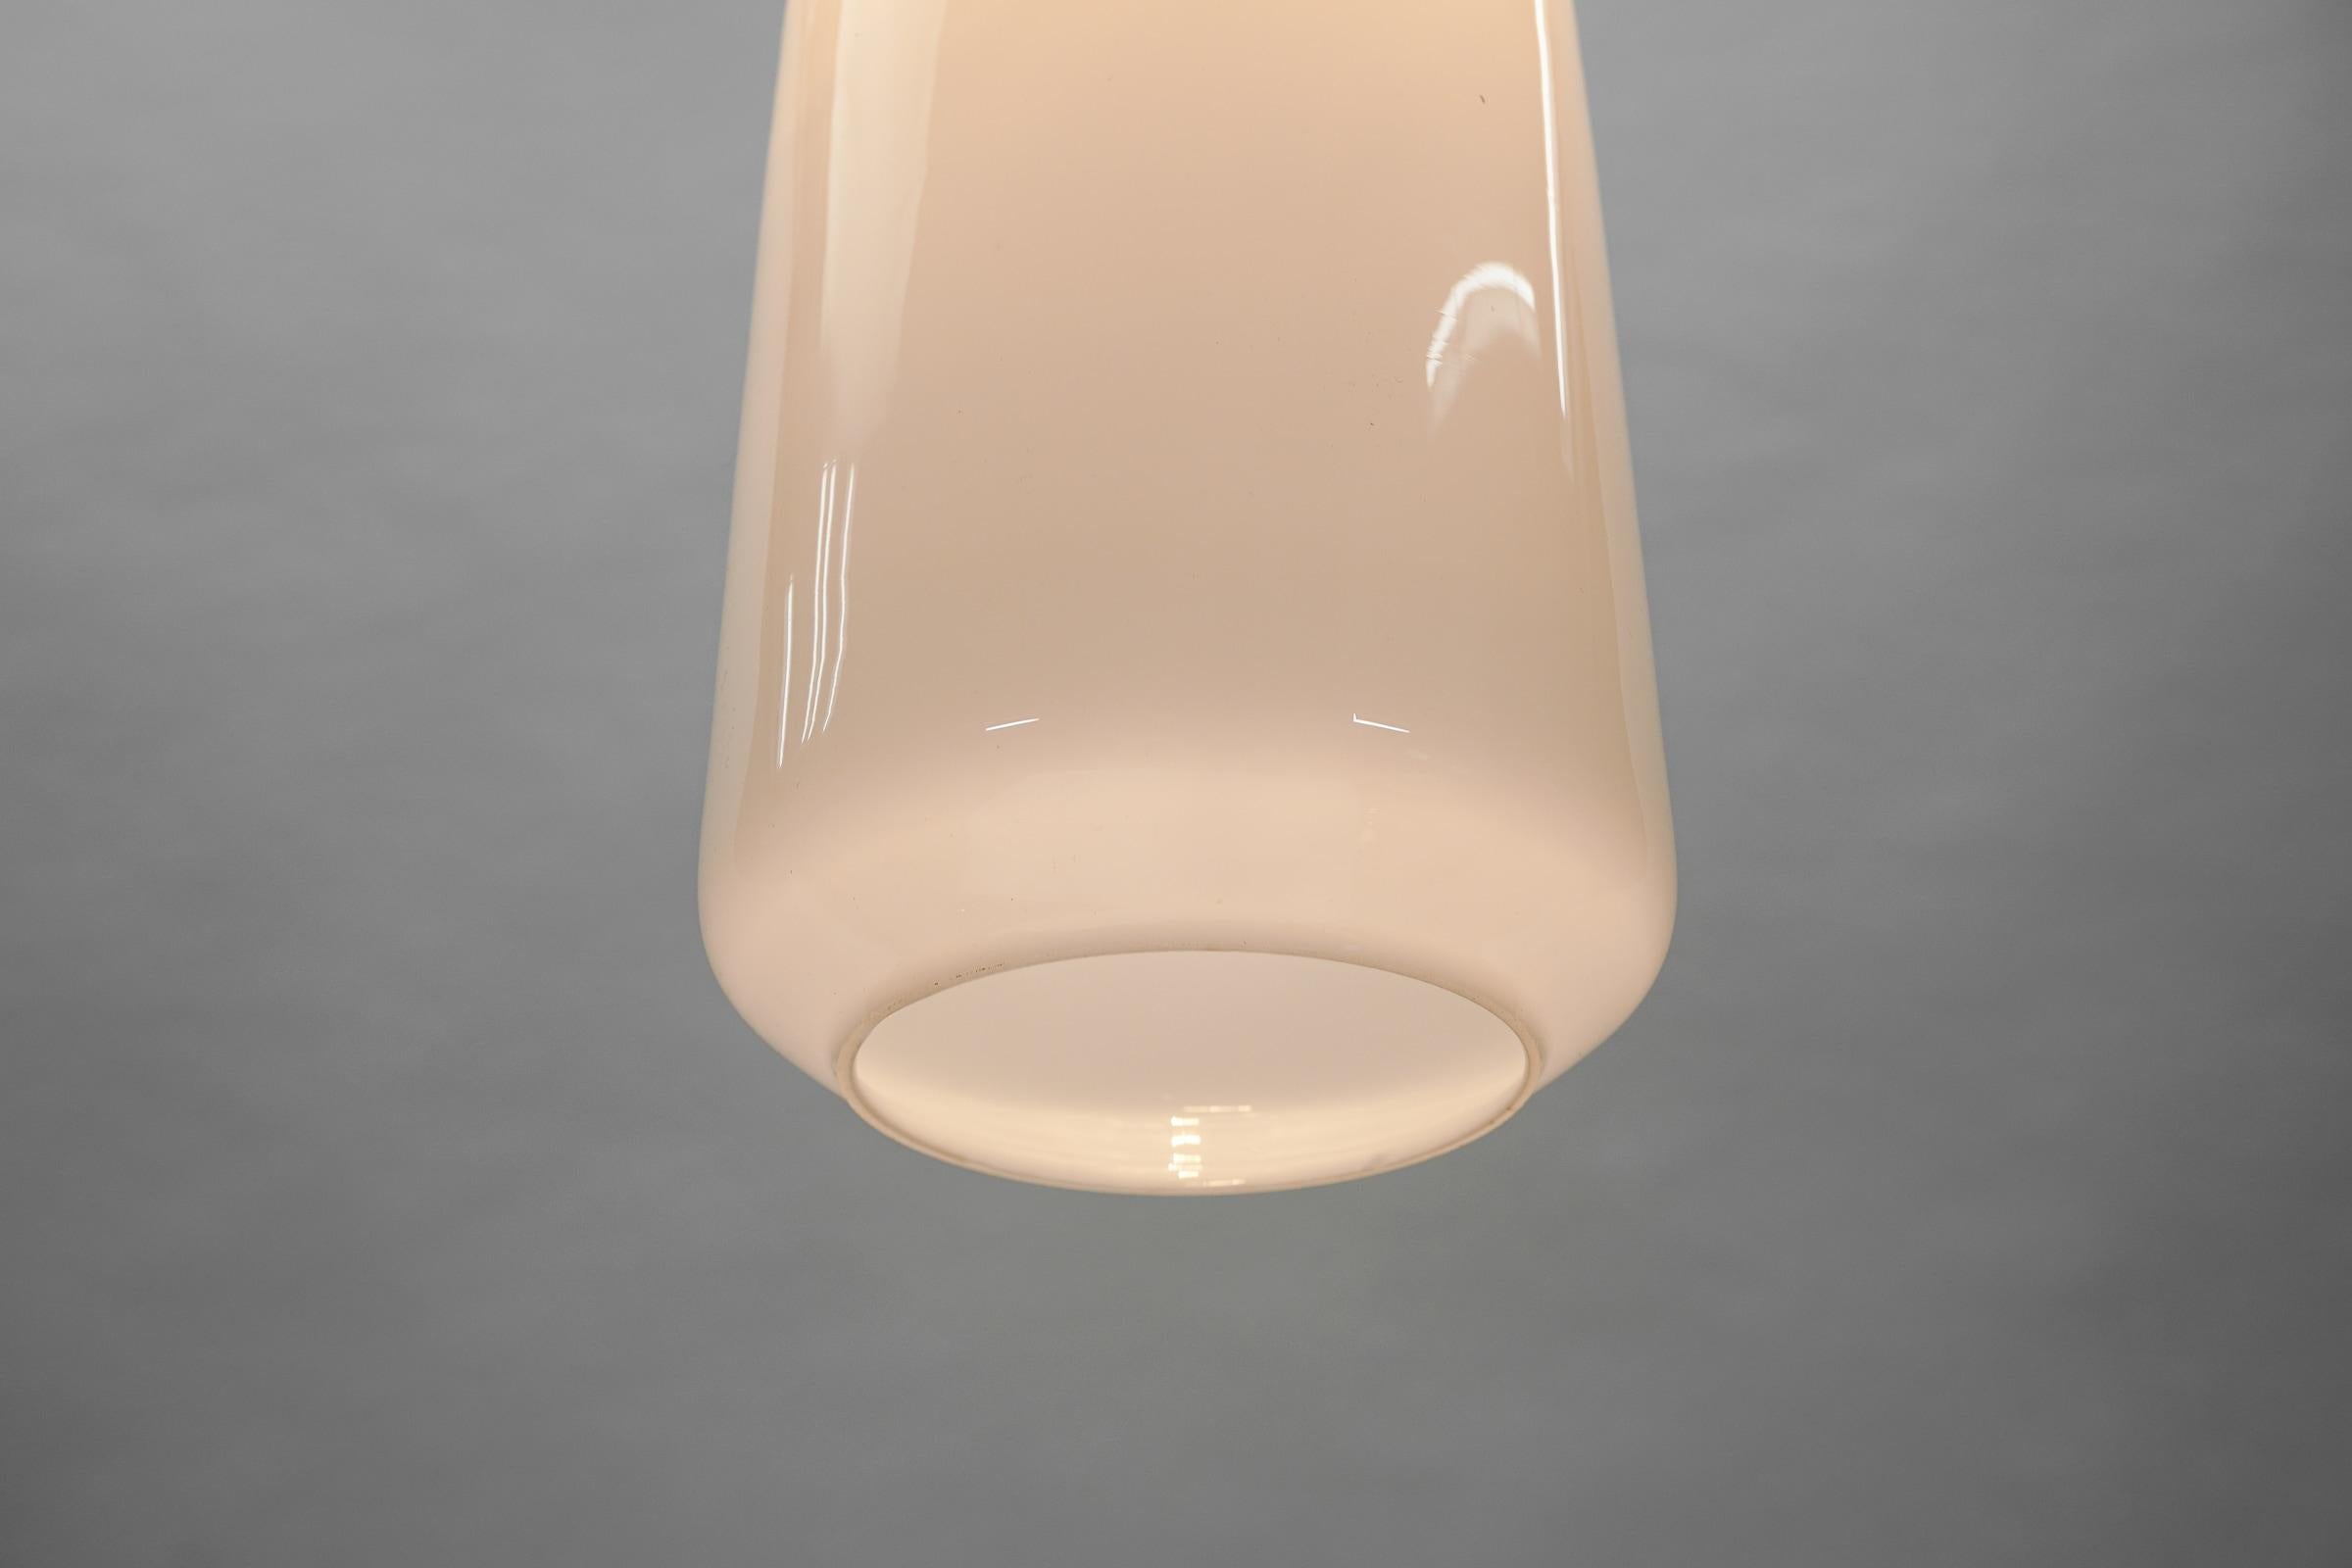 Cylindrical Scandinavian Opal Glass Hanging Lamp with Teak Wood, 1960s For Sale 2